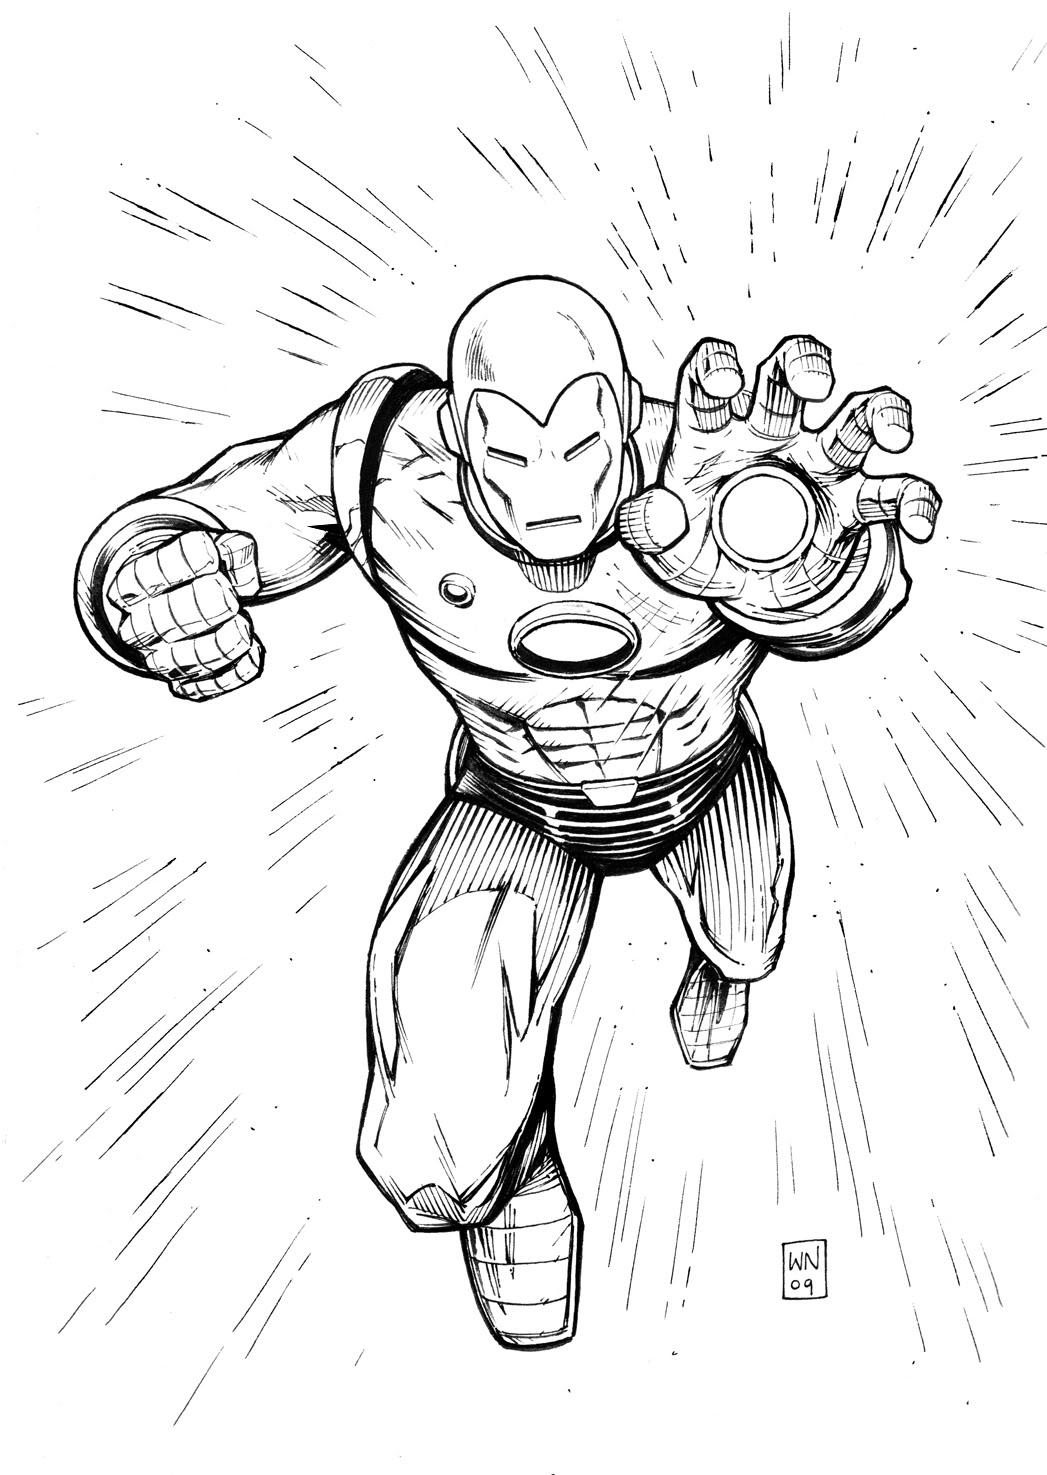 Free Printable Iron Man Coloring Pages For Kids - Best ...